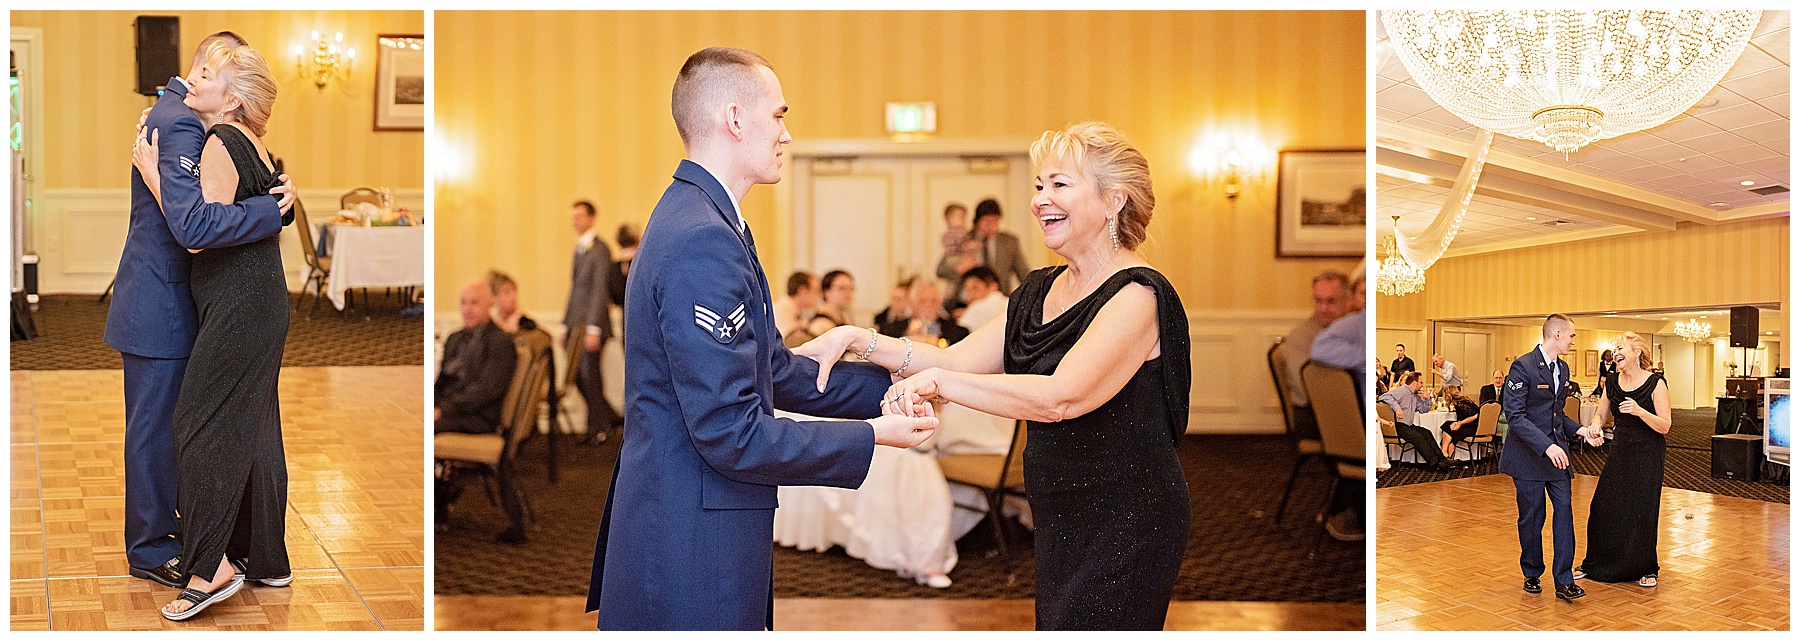 Mother Son Dance at the Outdoor Country Club